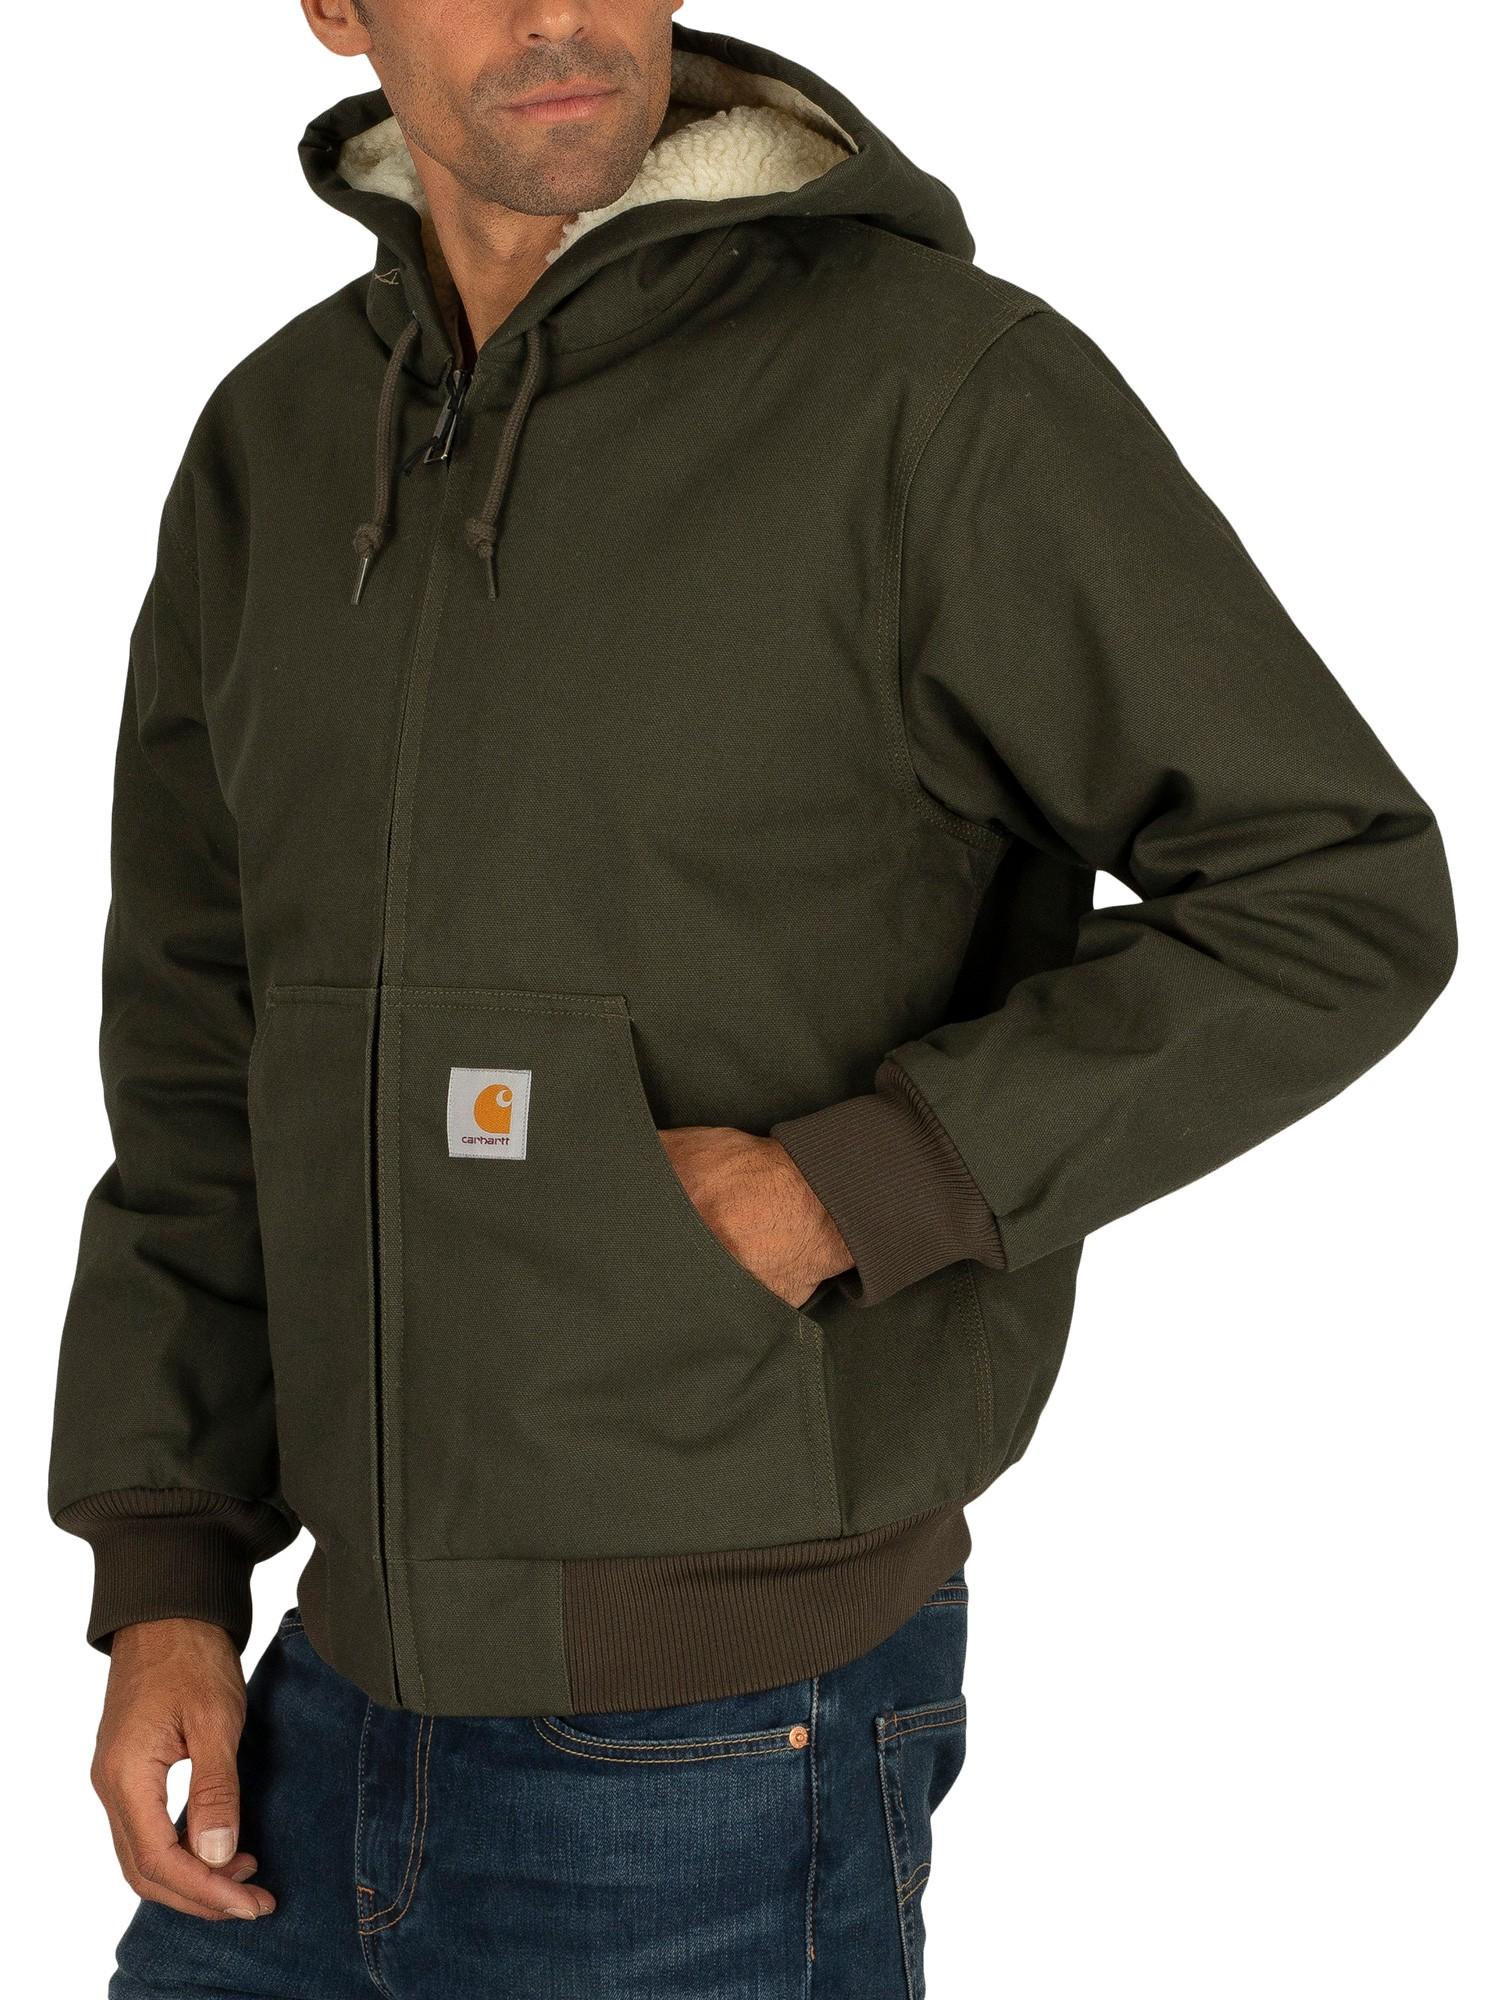 Carhartt WIP Active Pile Jacket in Green for Men - Lyst